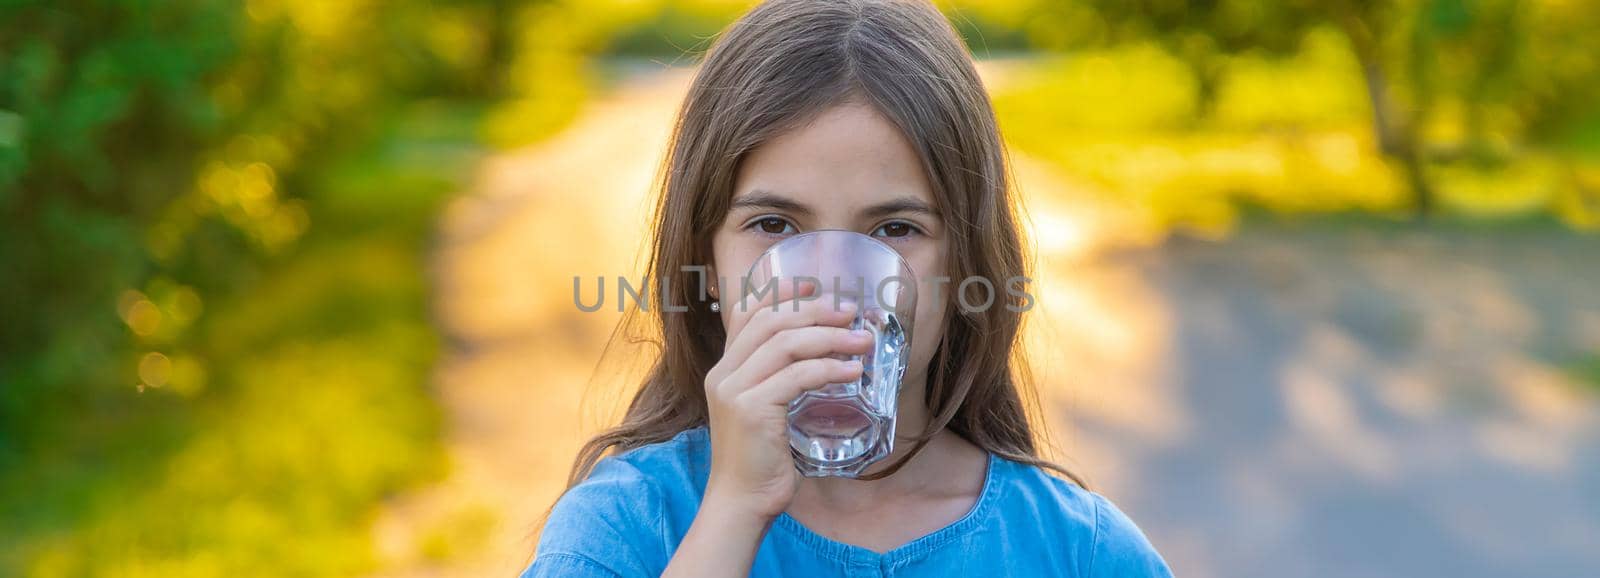 The child drinks water from a glass. Selective focus. Kid.